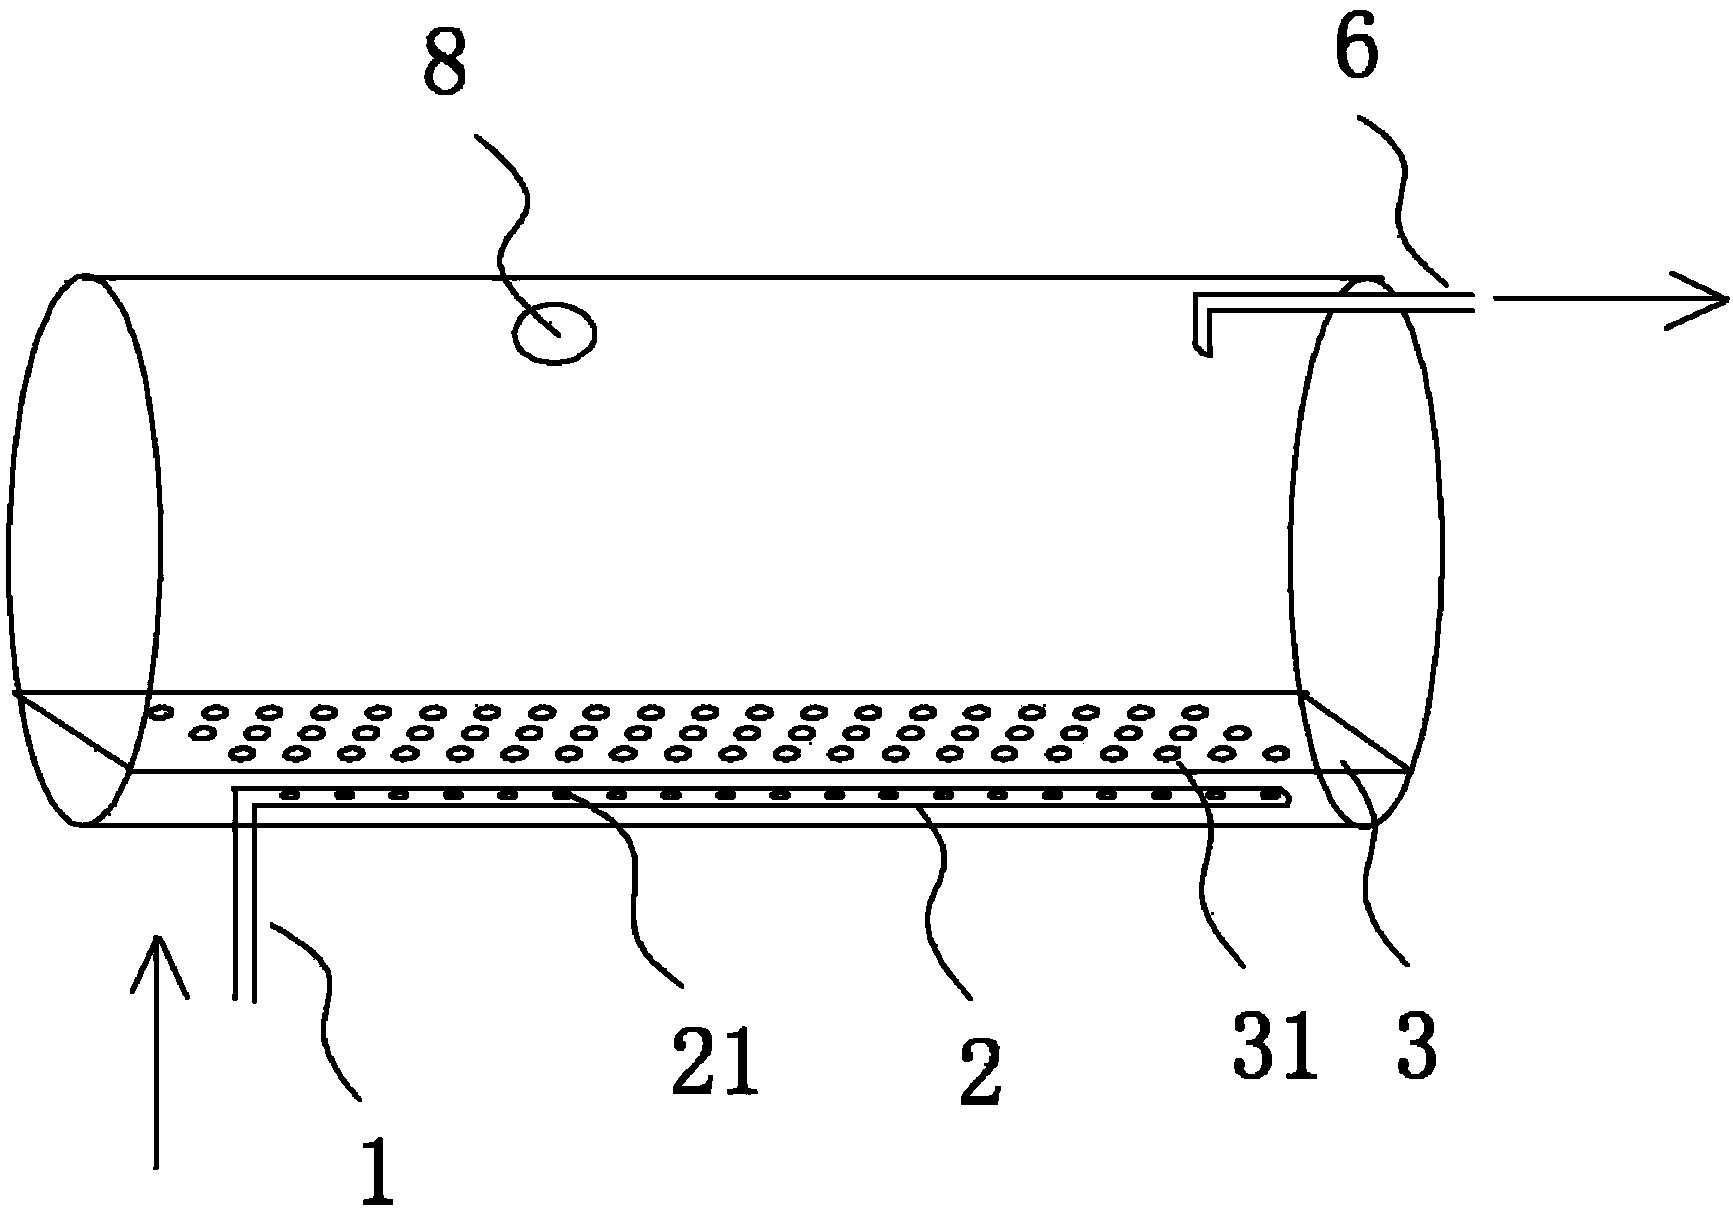 Micro-electrolysis intensifying treater and method for treating wastewater by using same